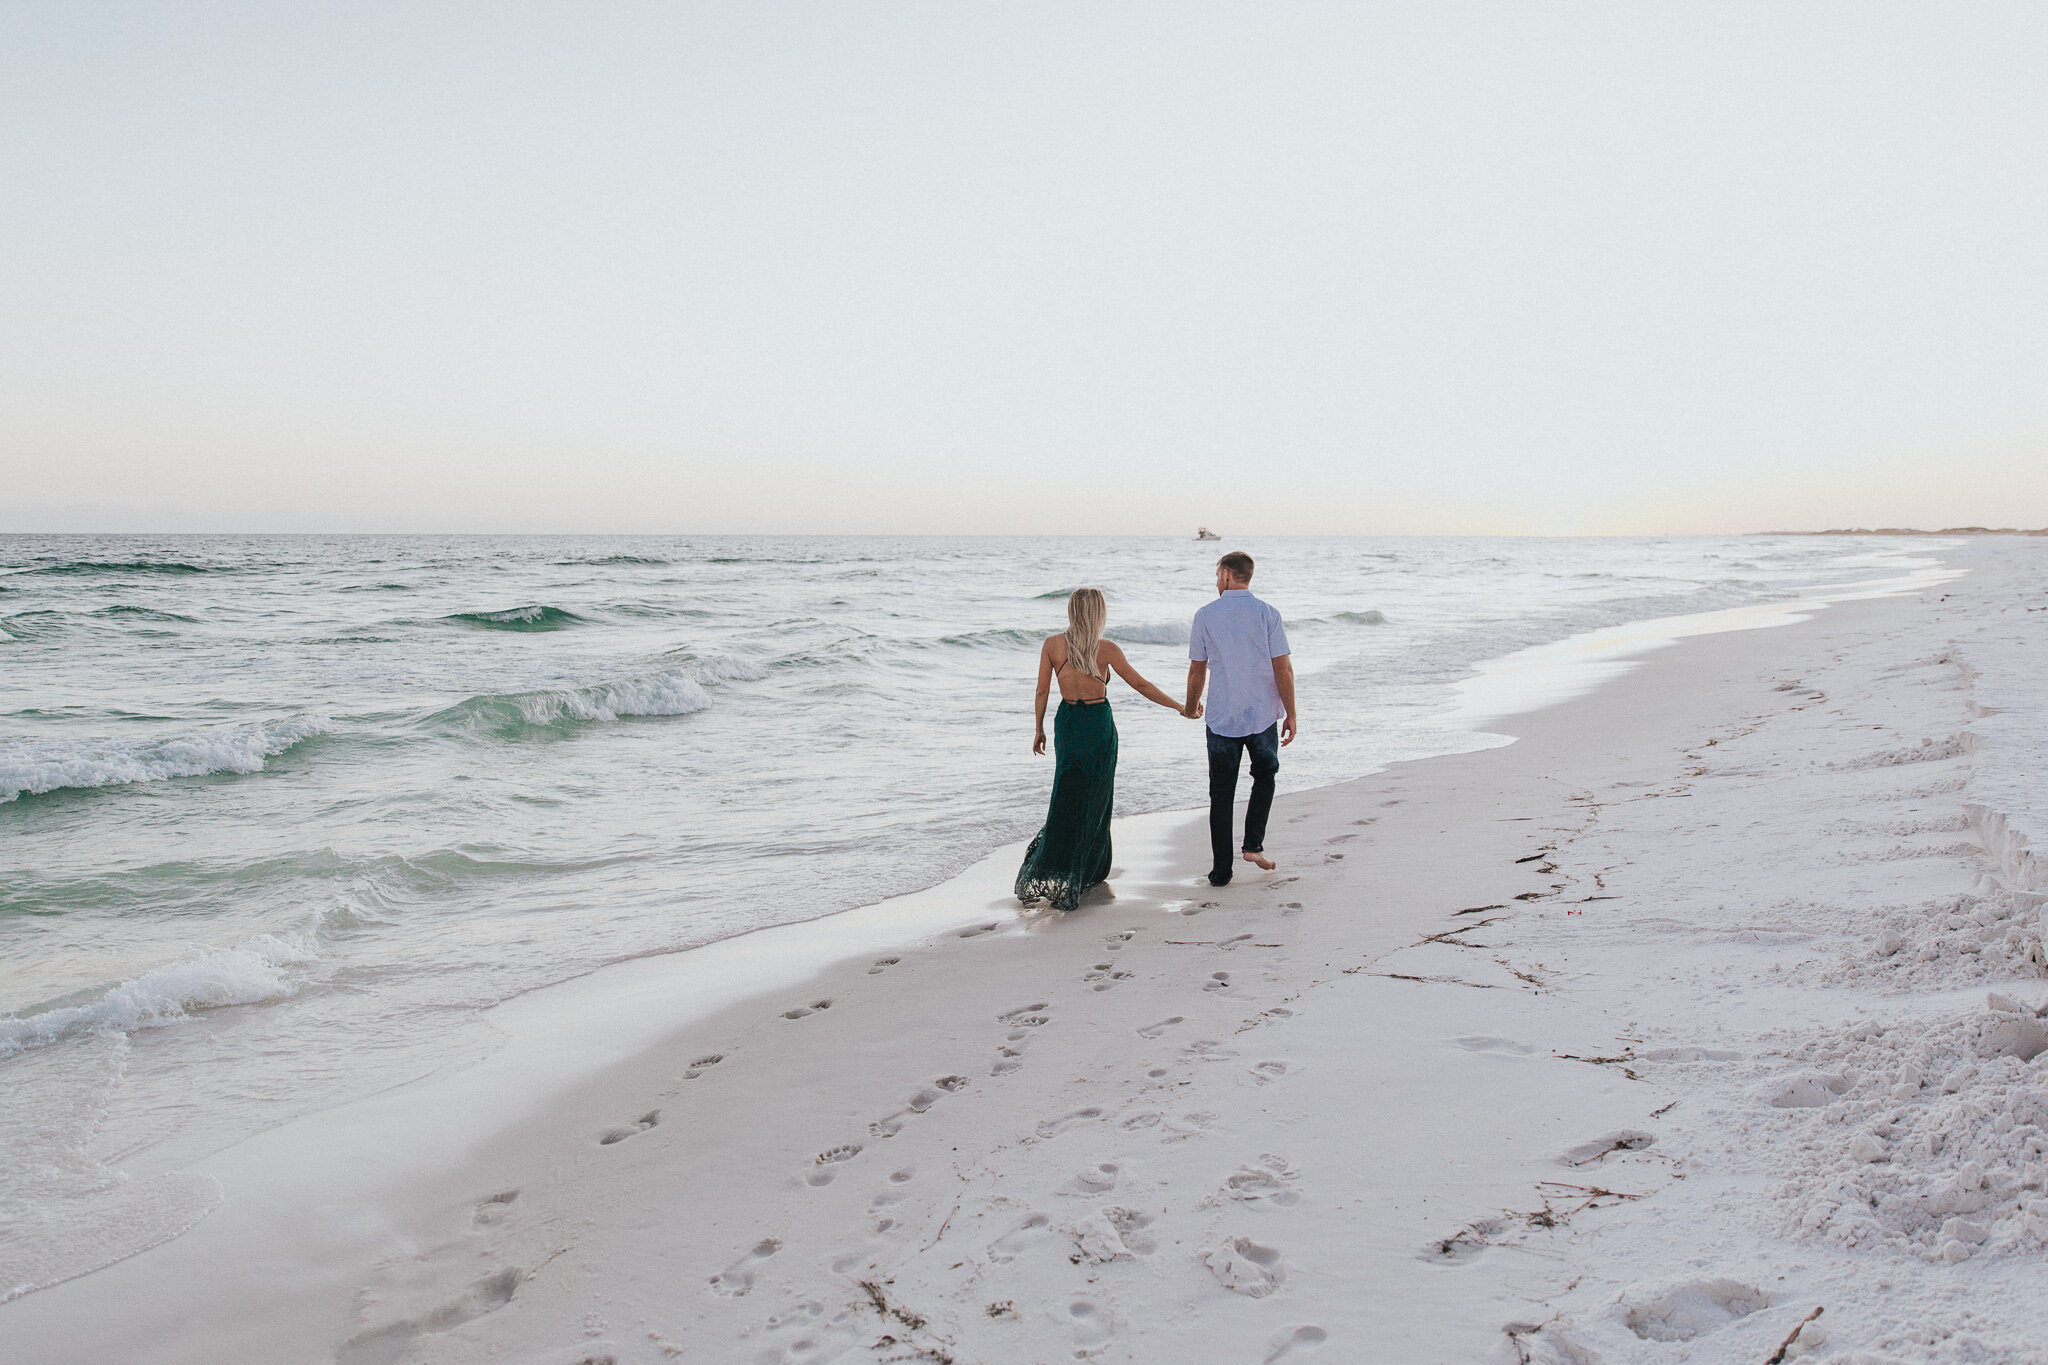  Destin Beach Sunset Engagement Session // Destin Photography by Bare Moments Photography 